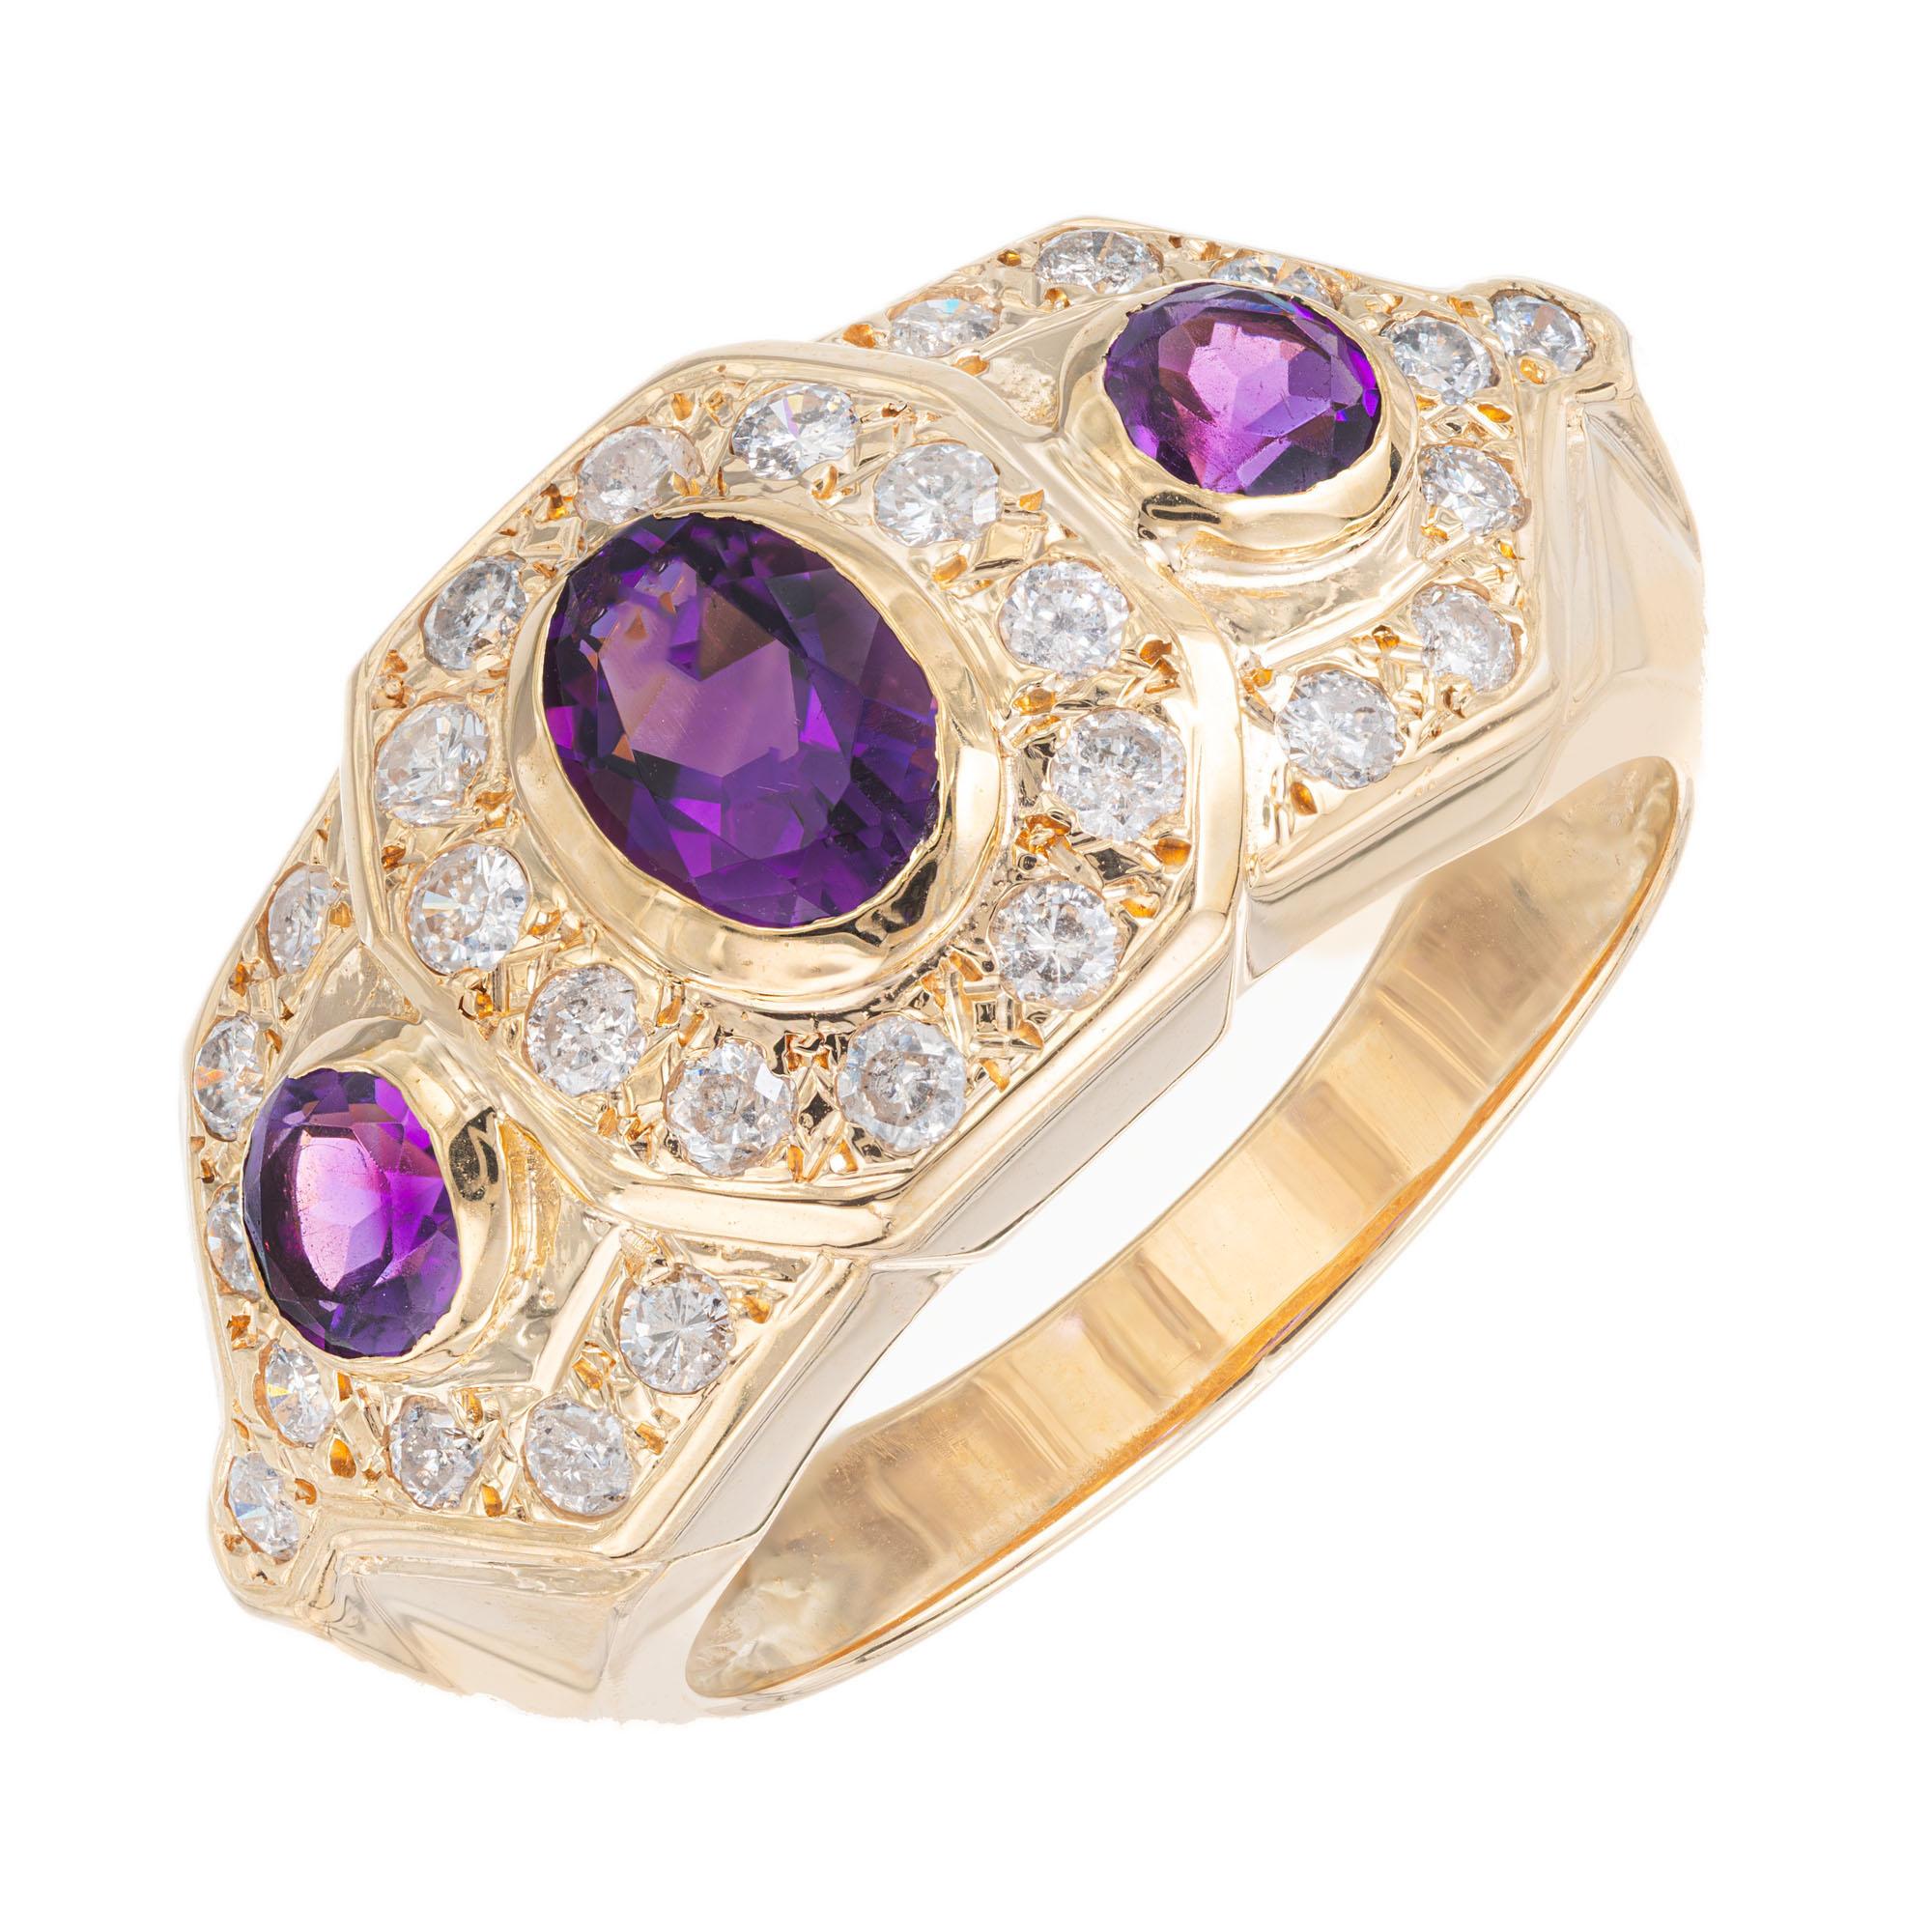 Oval and round amethyst 1980’s cocktail ring with brilliant cut accent diamonds in a 14k yellow gold setting. 

1 oval purple amethyst, approx. .40cts
2 round purple amethyst, approx. .30cts
28 round brilliant cut diamonds, G-H SI approx.